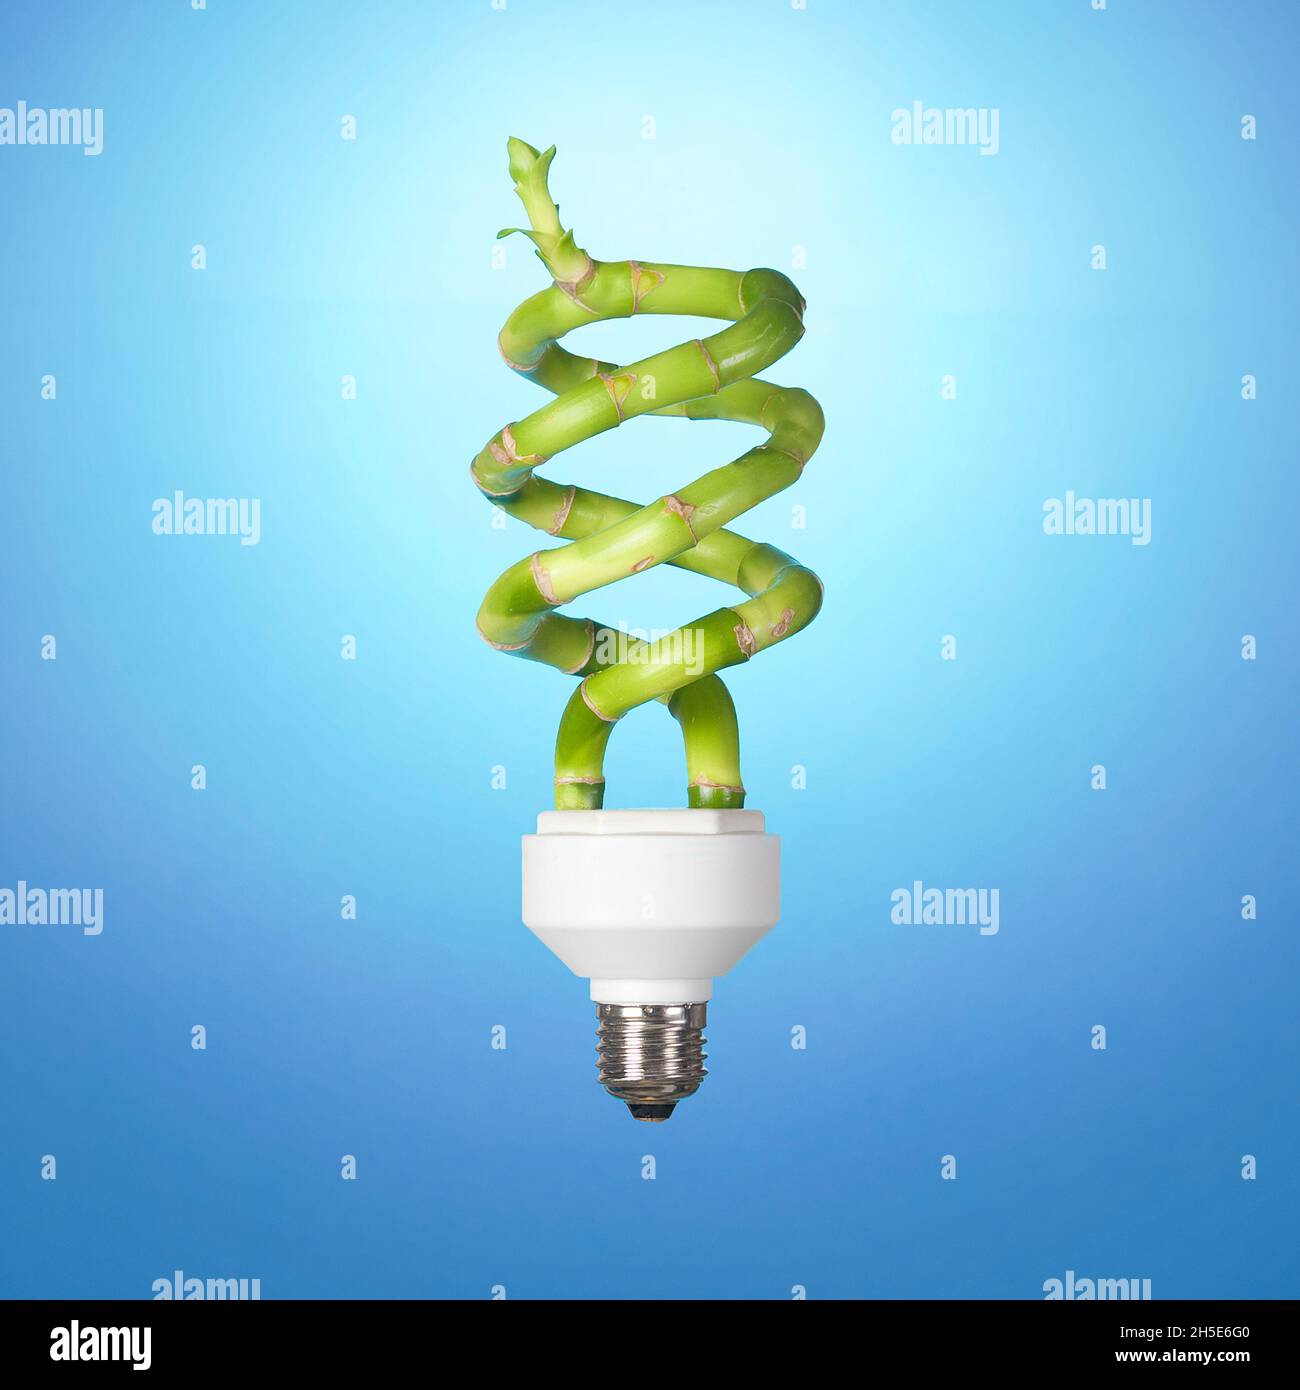 This photograph shows the concept of green energy. Stock Photo